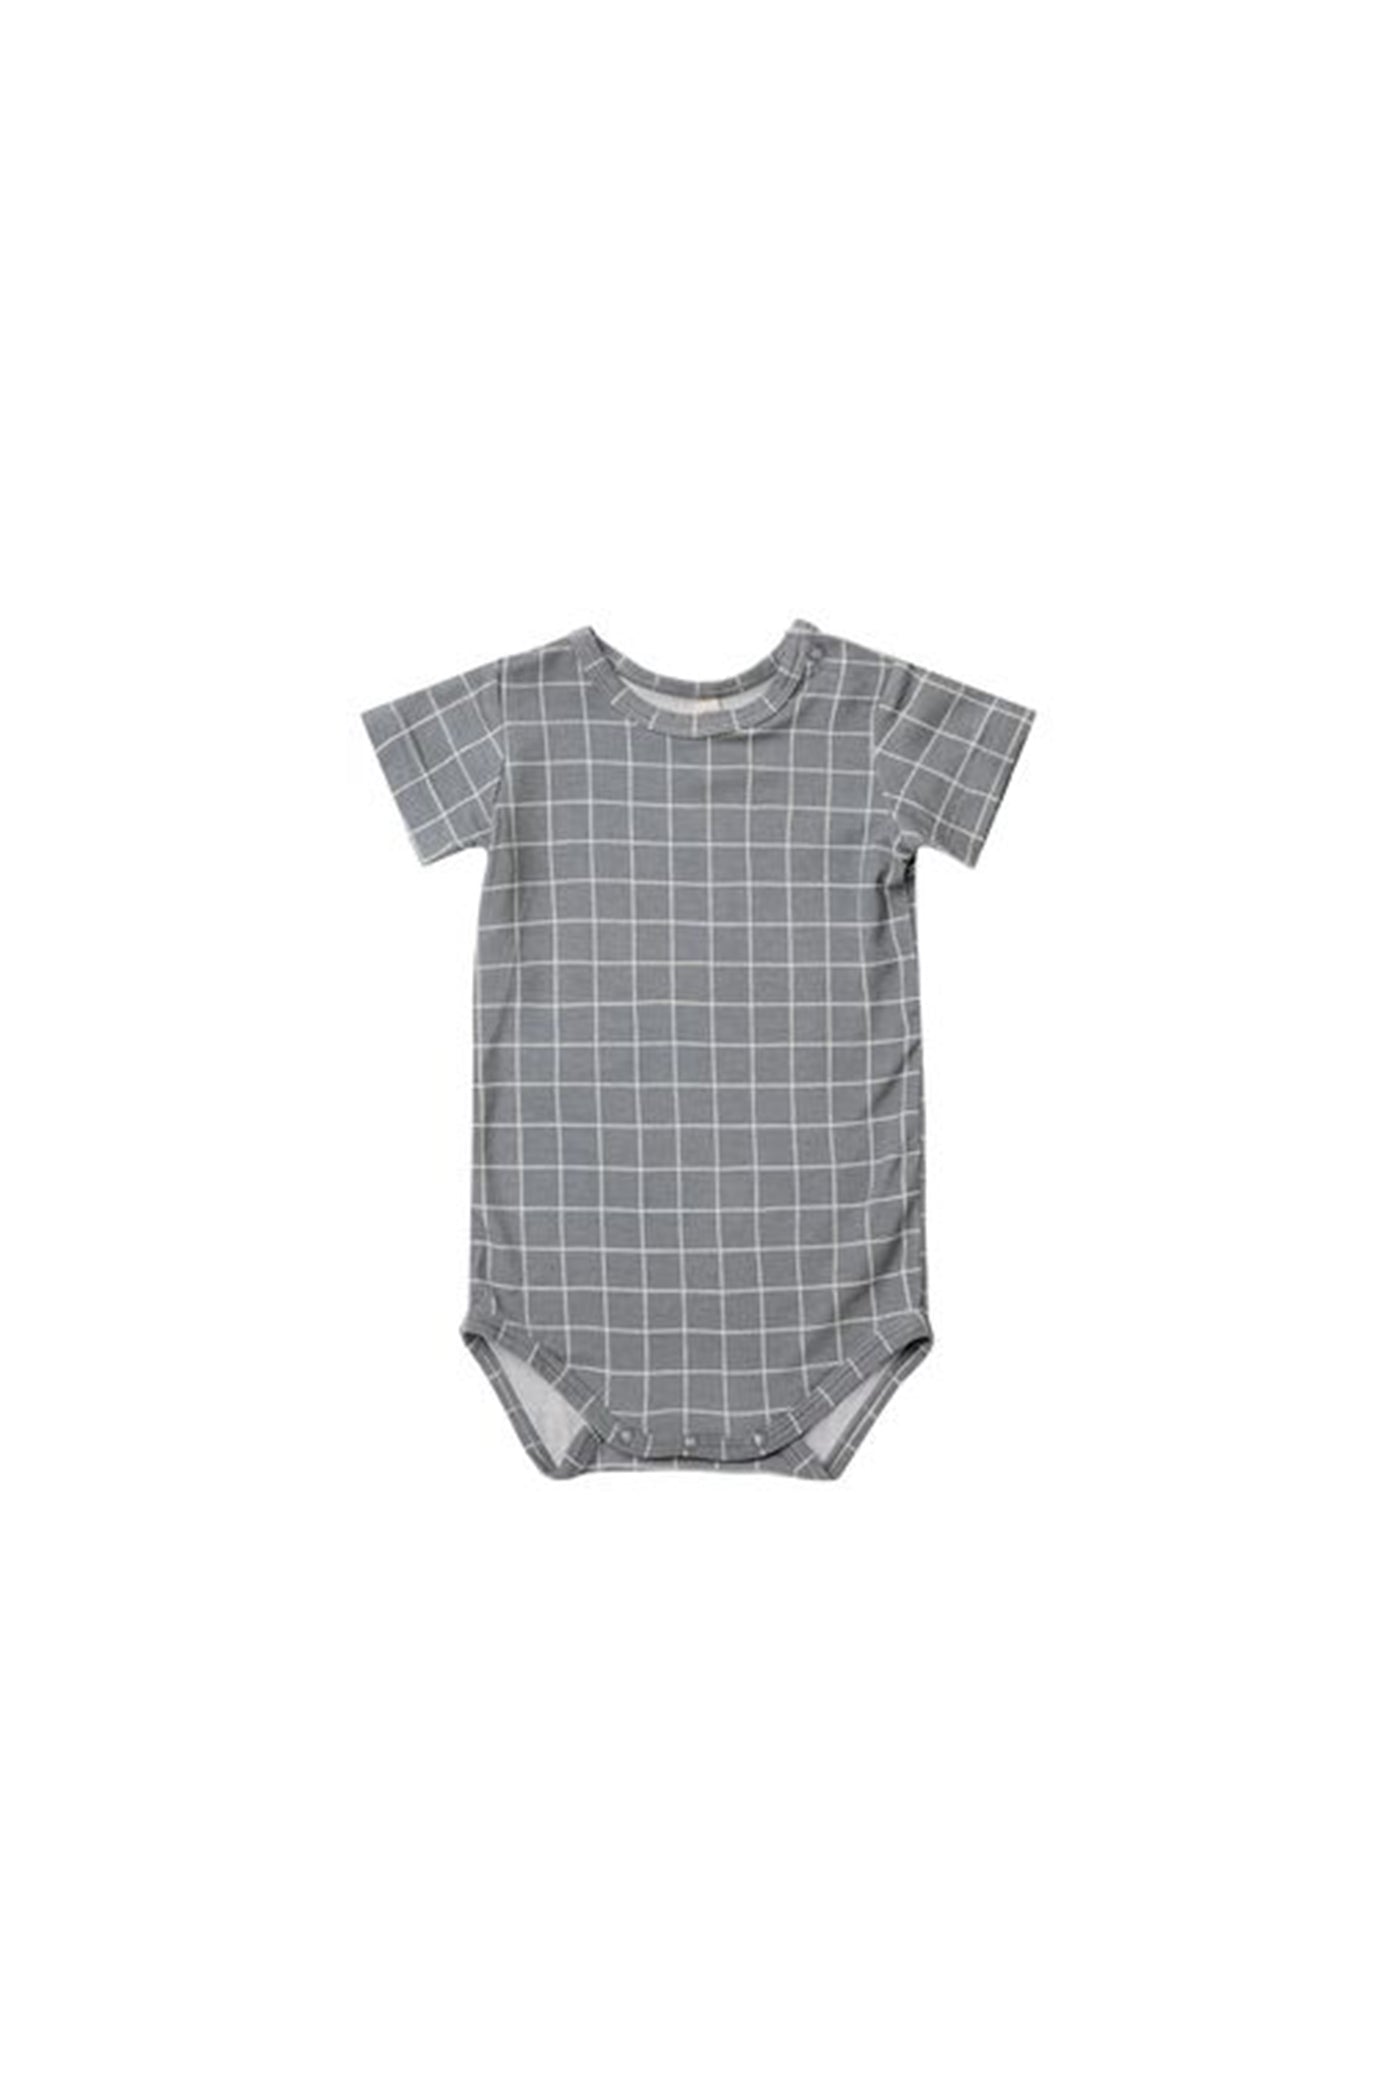 Bamboo Short Sleeve Kids Bodysuit by Quincy Mae